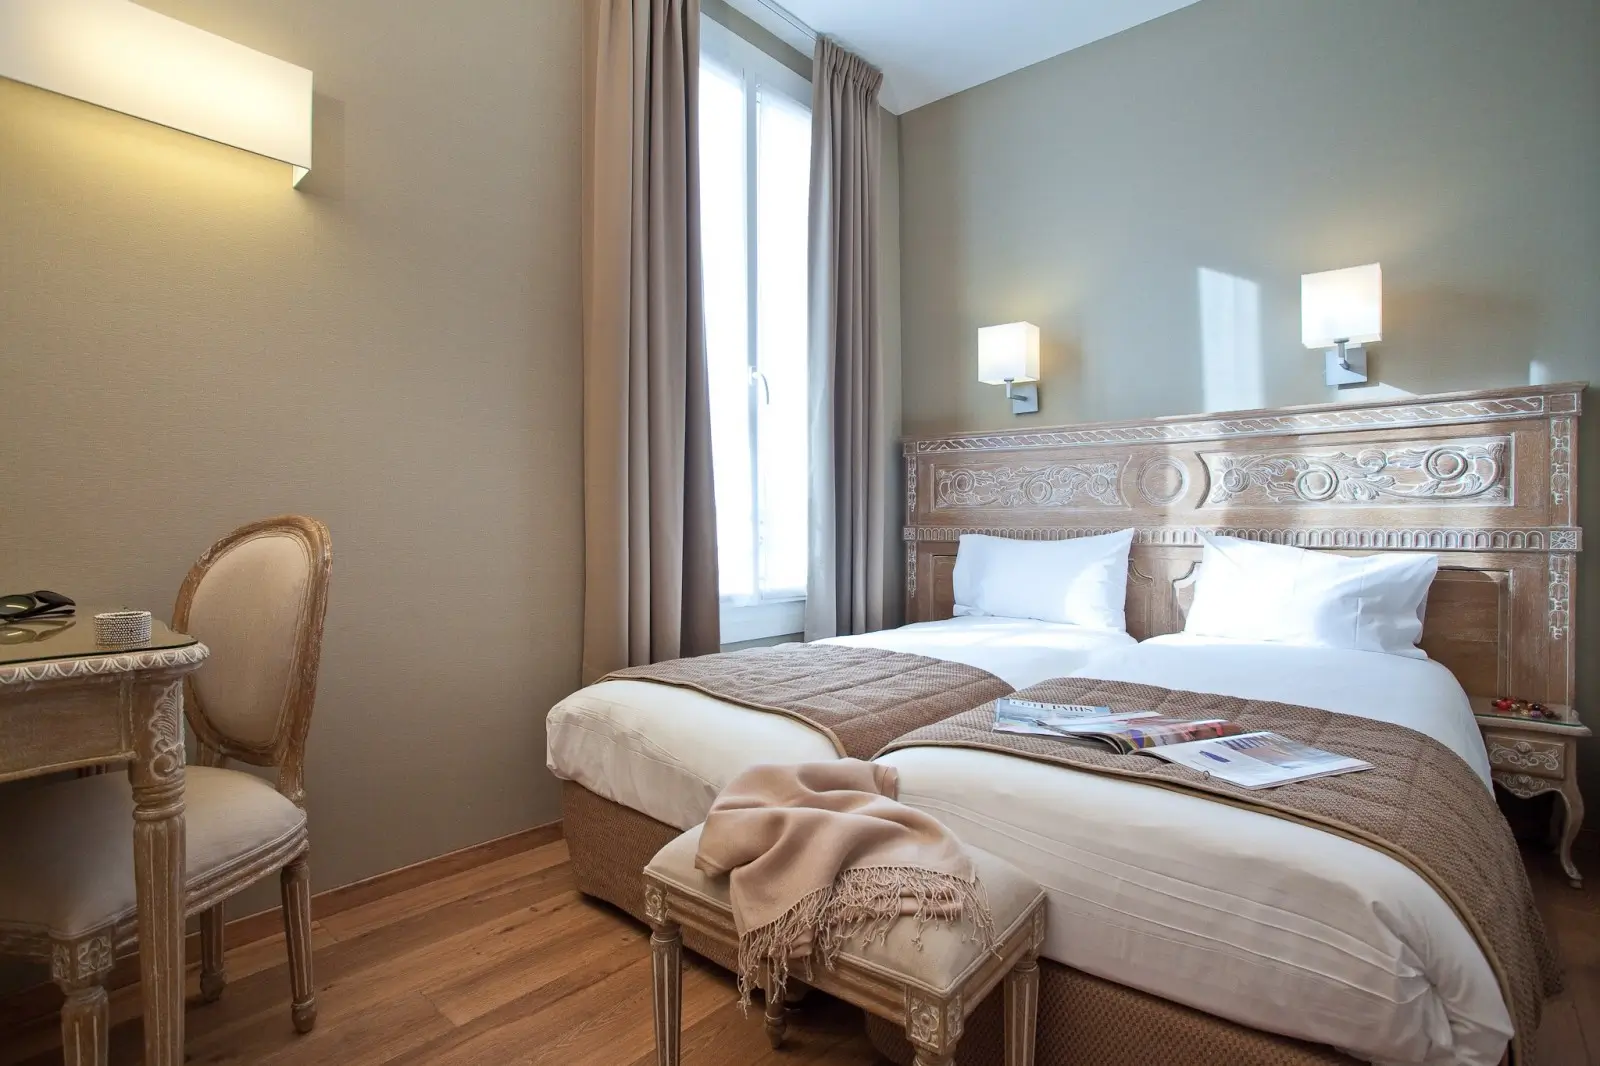 Cozy and sustainable bedroom at Hotel du Printemps, an eco-friendly hotel in Paris, featuring a traditional carved wooden bed frame, soft beige tones, and a quaint sitting area by the window with views of the city.